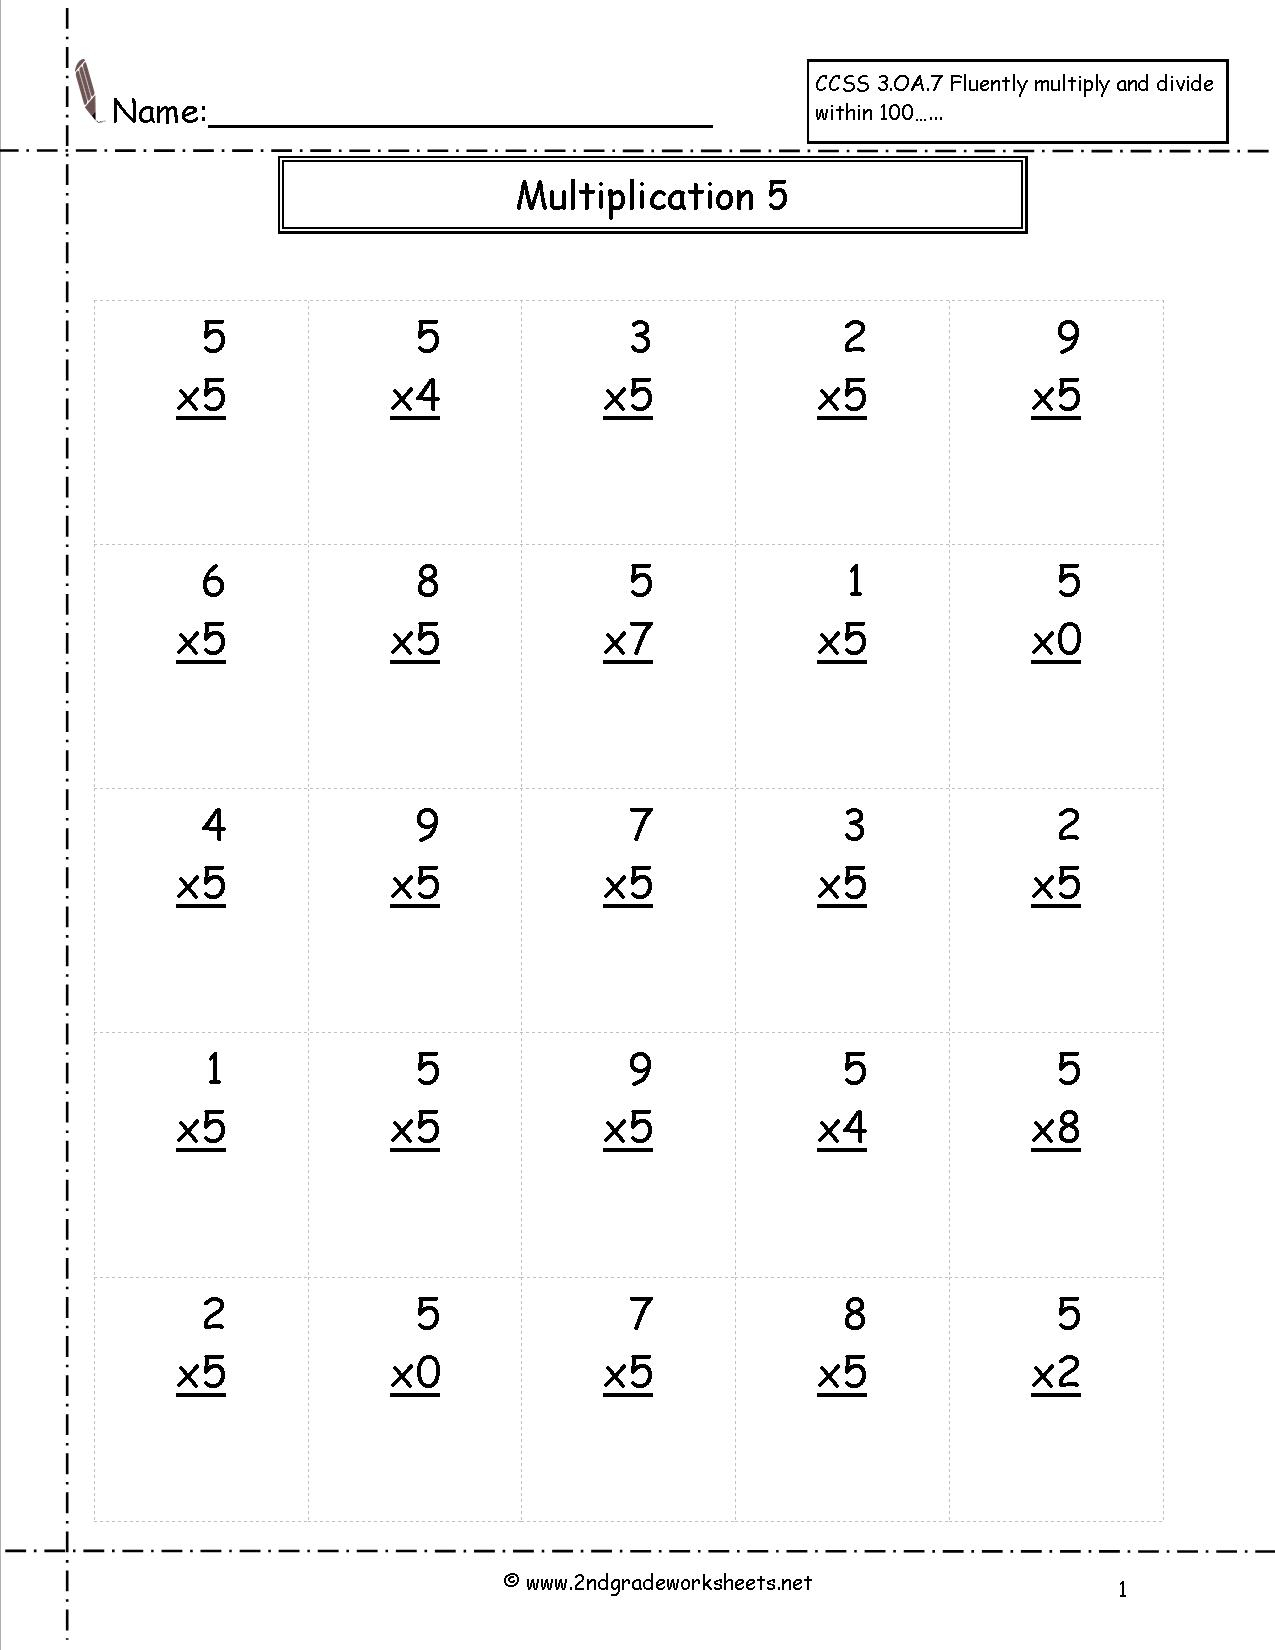 Multiplication Worksheets And Printouts regarding Printable Multiplication Worksheets By Number